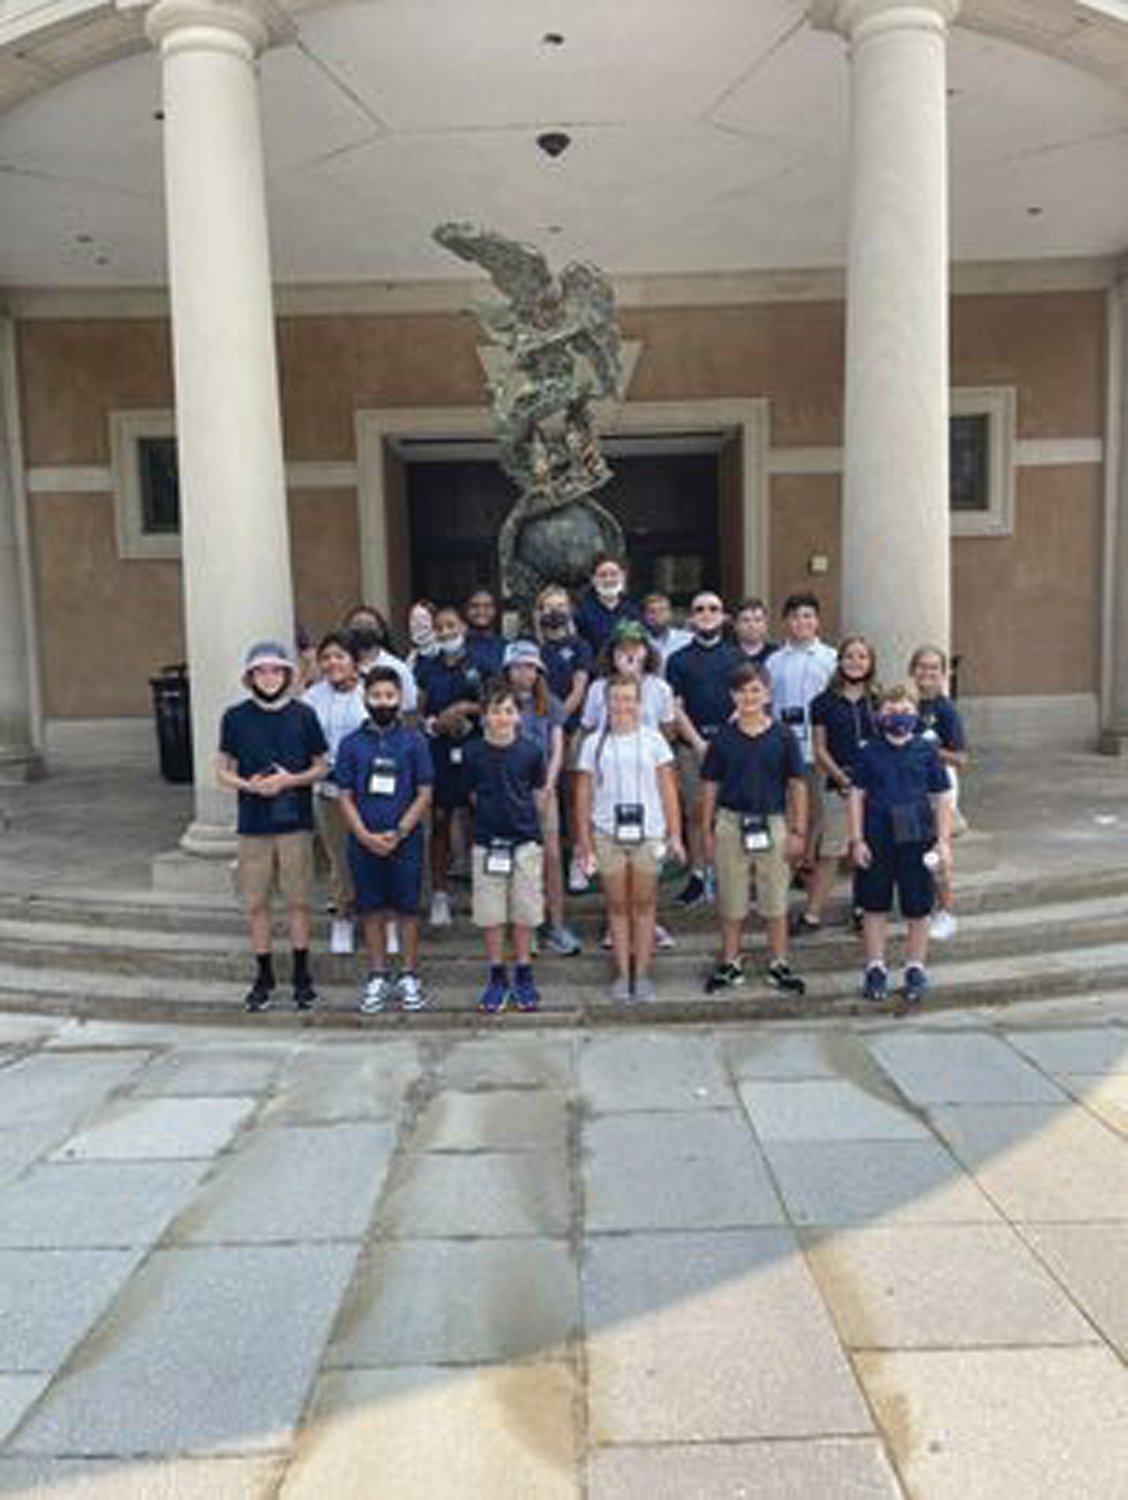 THE LAY OF THE LAND: Ryan Golditch, third from left, and the members of his James Madison group pose at Arlington National Cemetery.